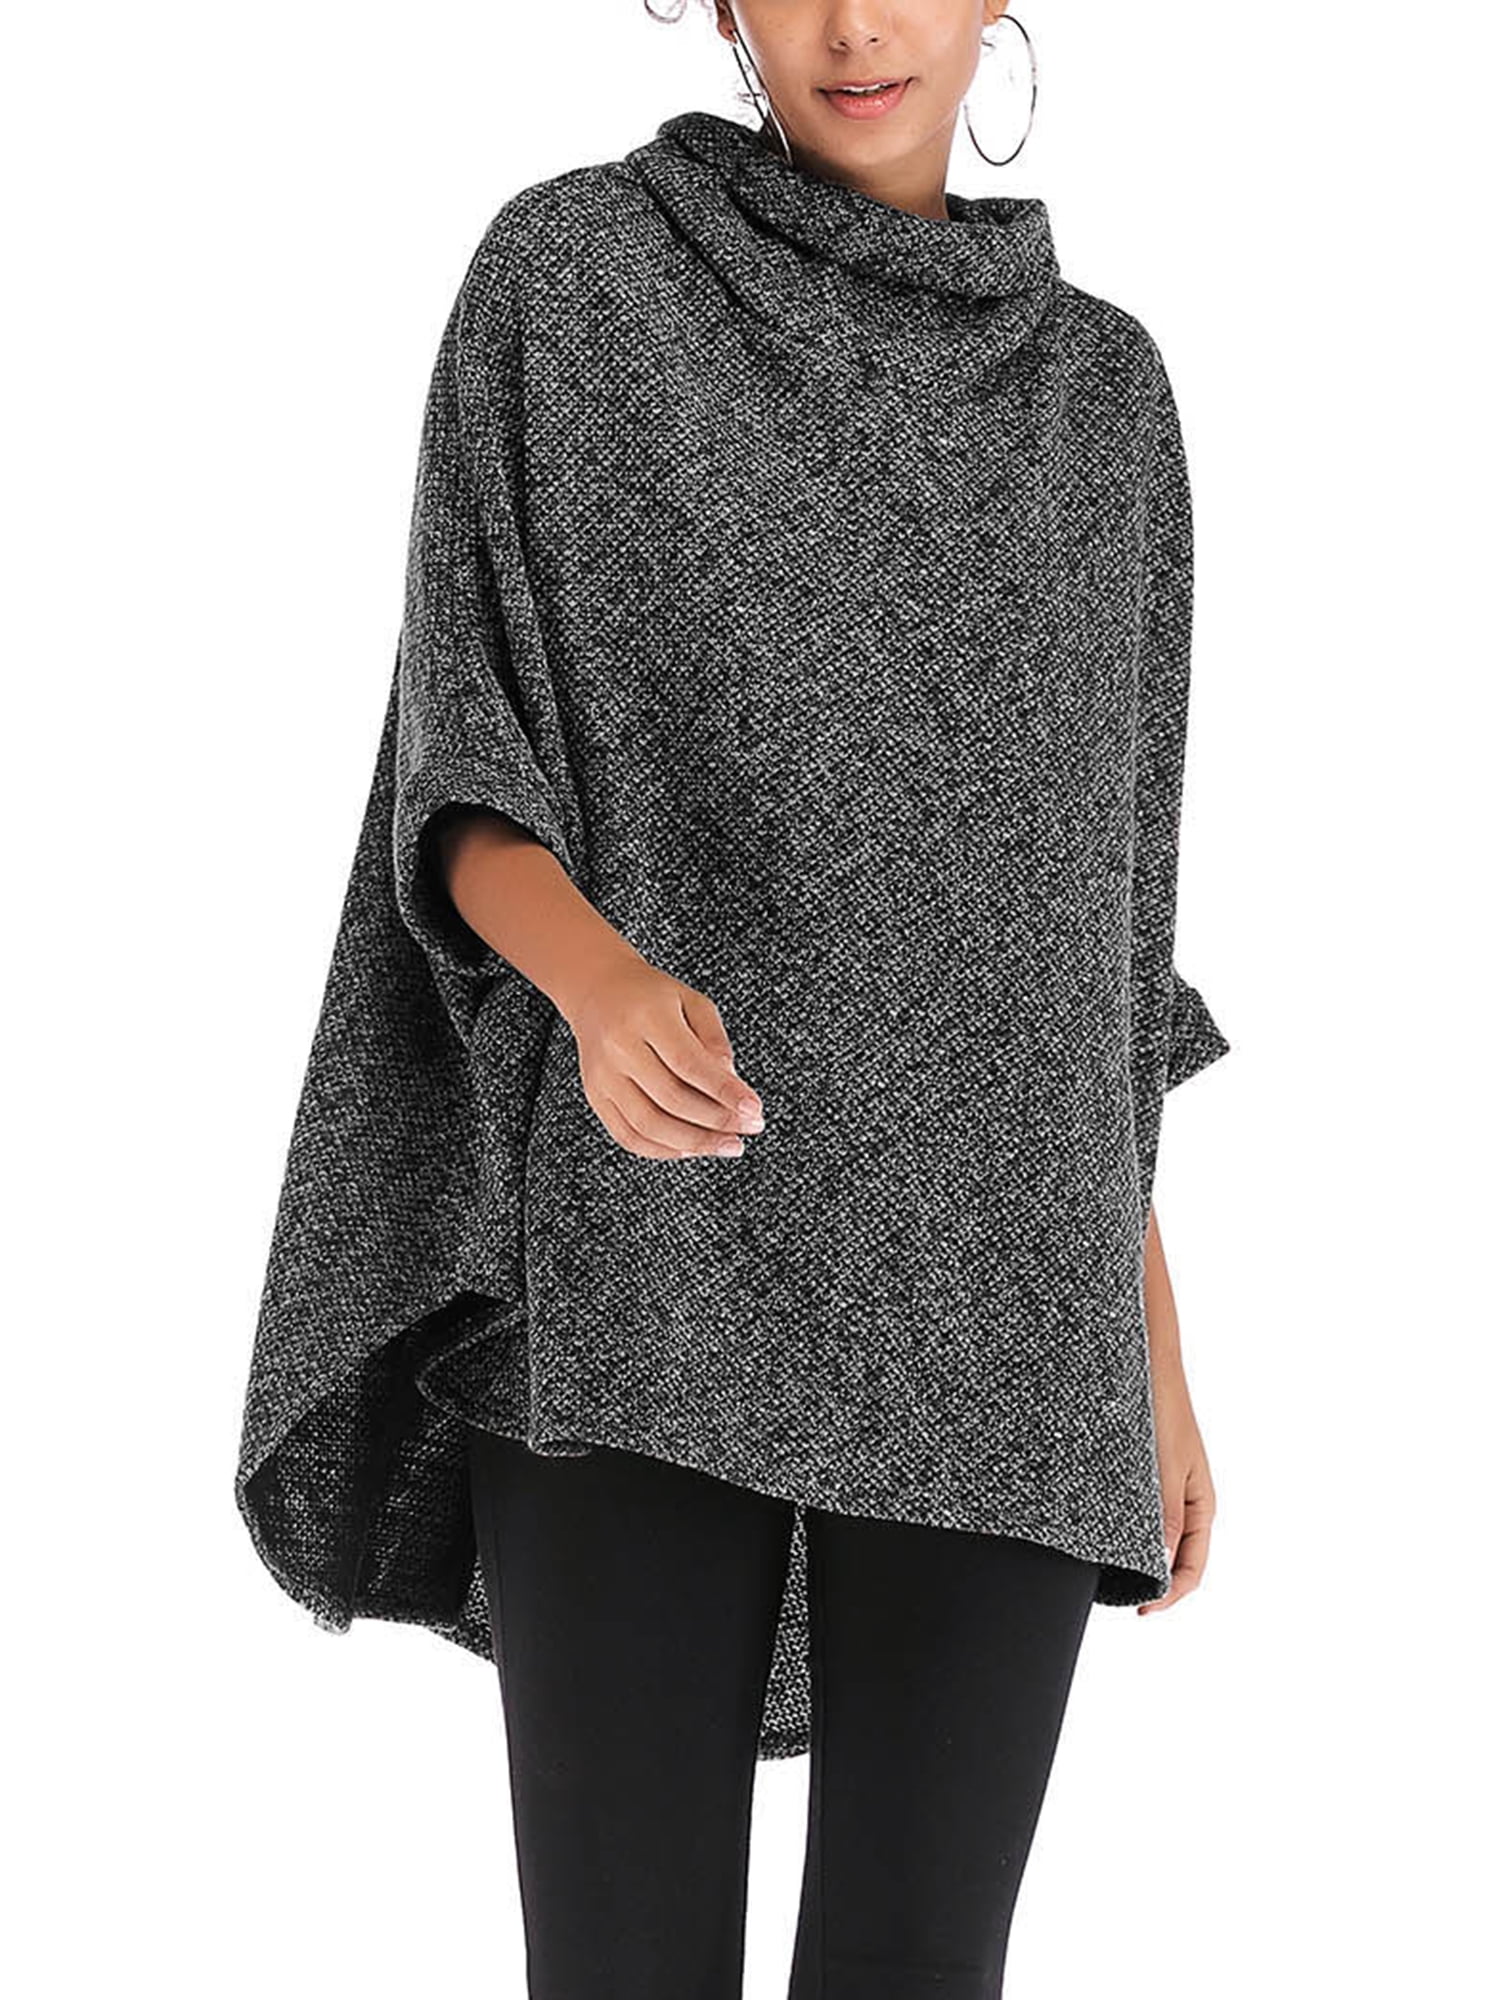 DODOING - Women's Turtleneck Poncho Sweater Loose Shawls Capes Casual ...